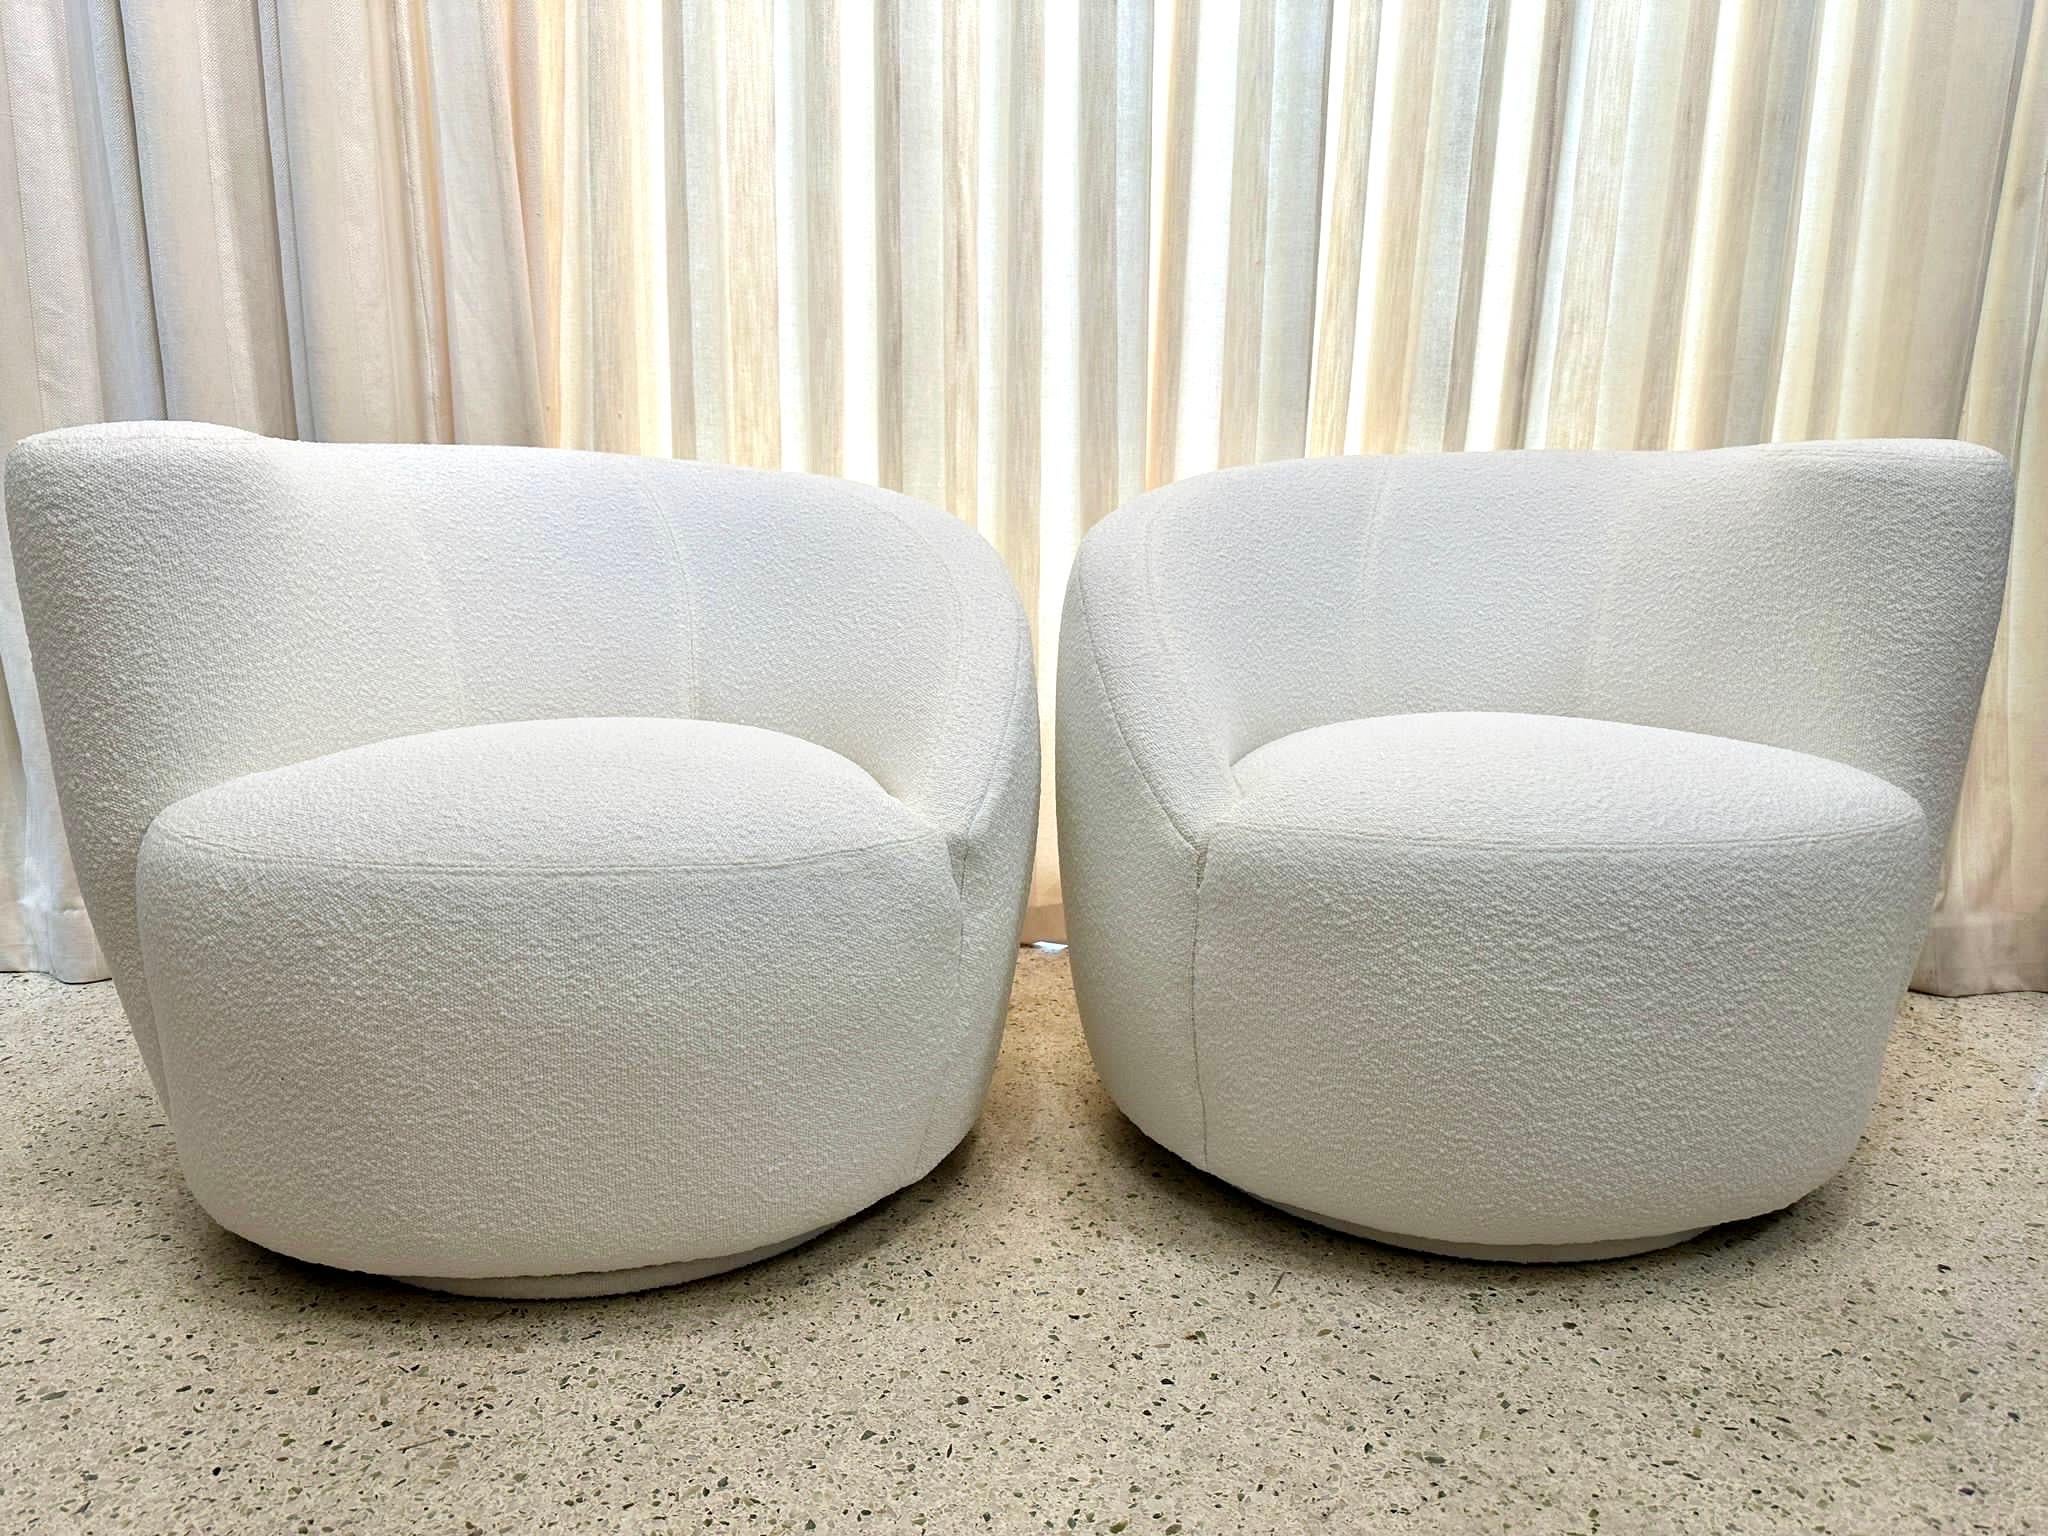 Vladimir Kagan Corkscrew Swivel Chairs for Directional in Bouclé, PAIR For Sale 5